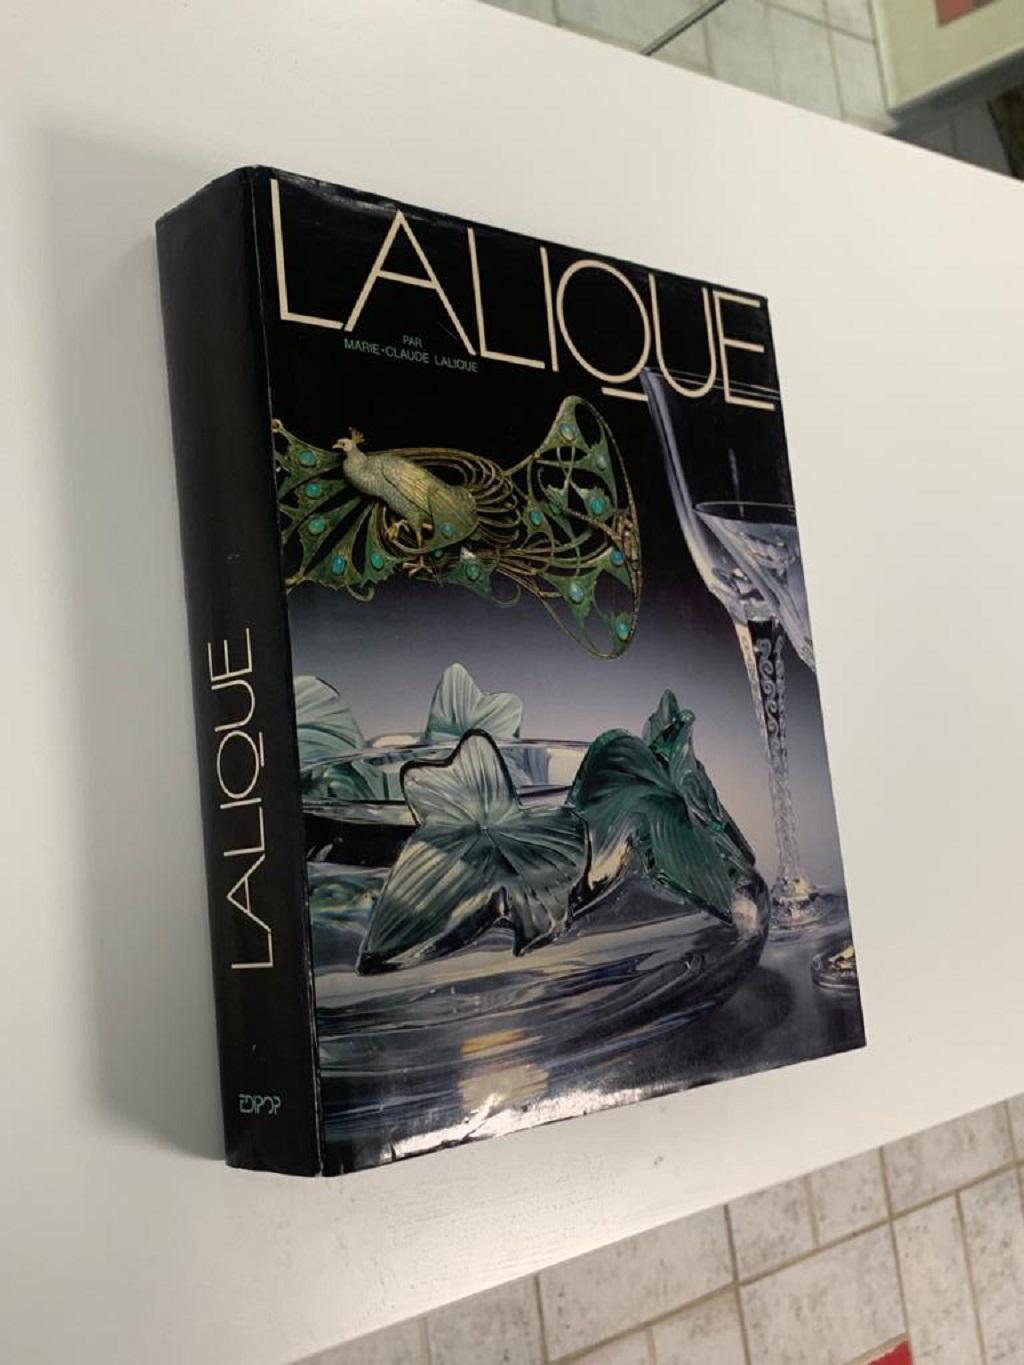 First edition, published by Edipop, 1988. Text in French. 
A beautiful publication covering the fine works of French glass designers Lalique. The book takes us through the history of the company from its beginnings under Réne Lalique and his